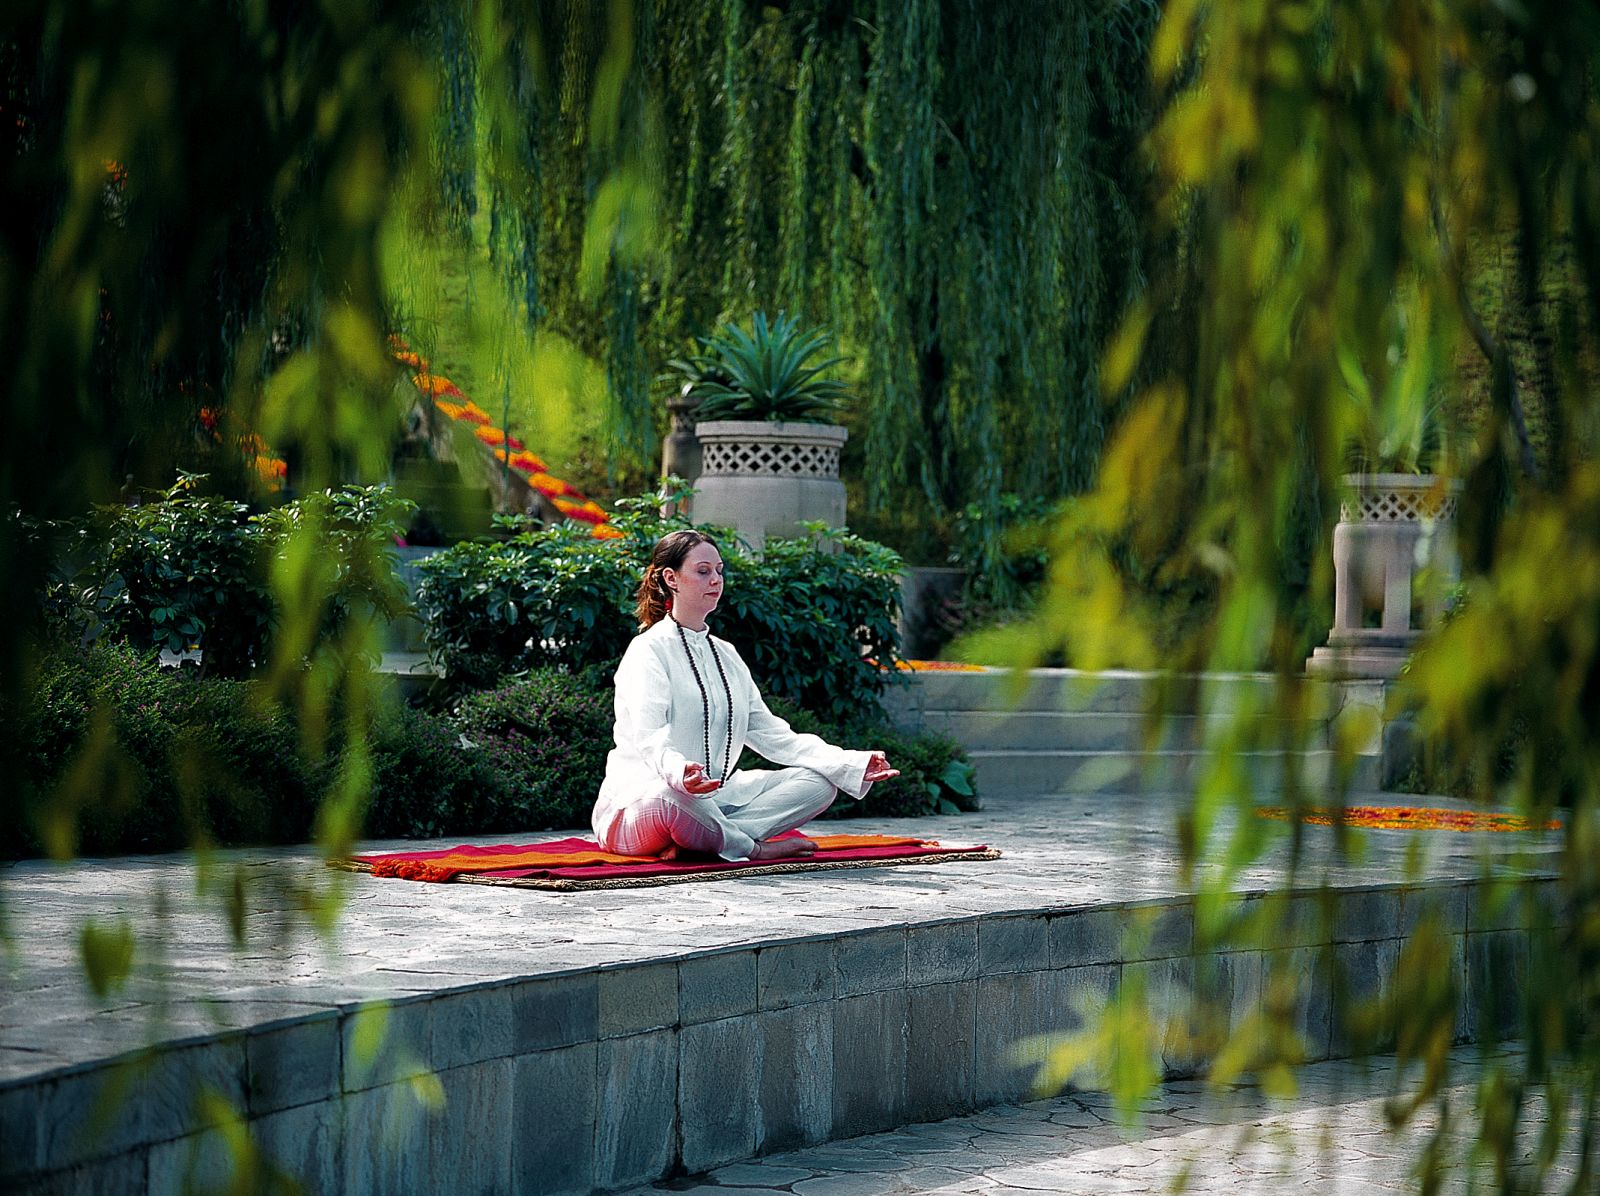 Guest meditating in the grounds of Ananda in the Himalayas India